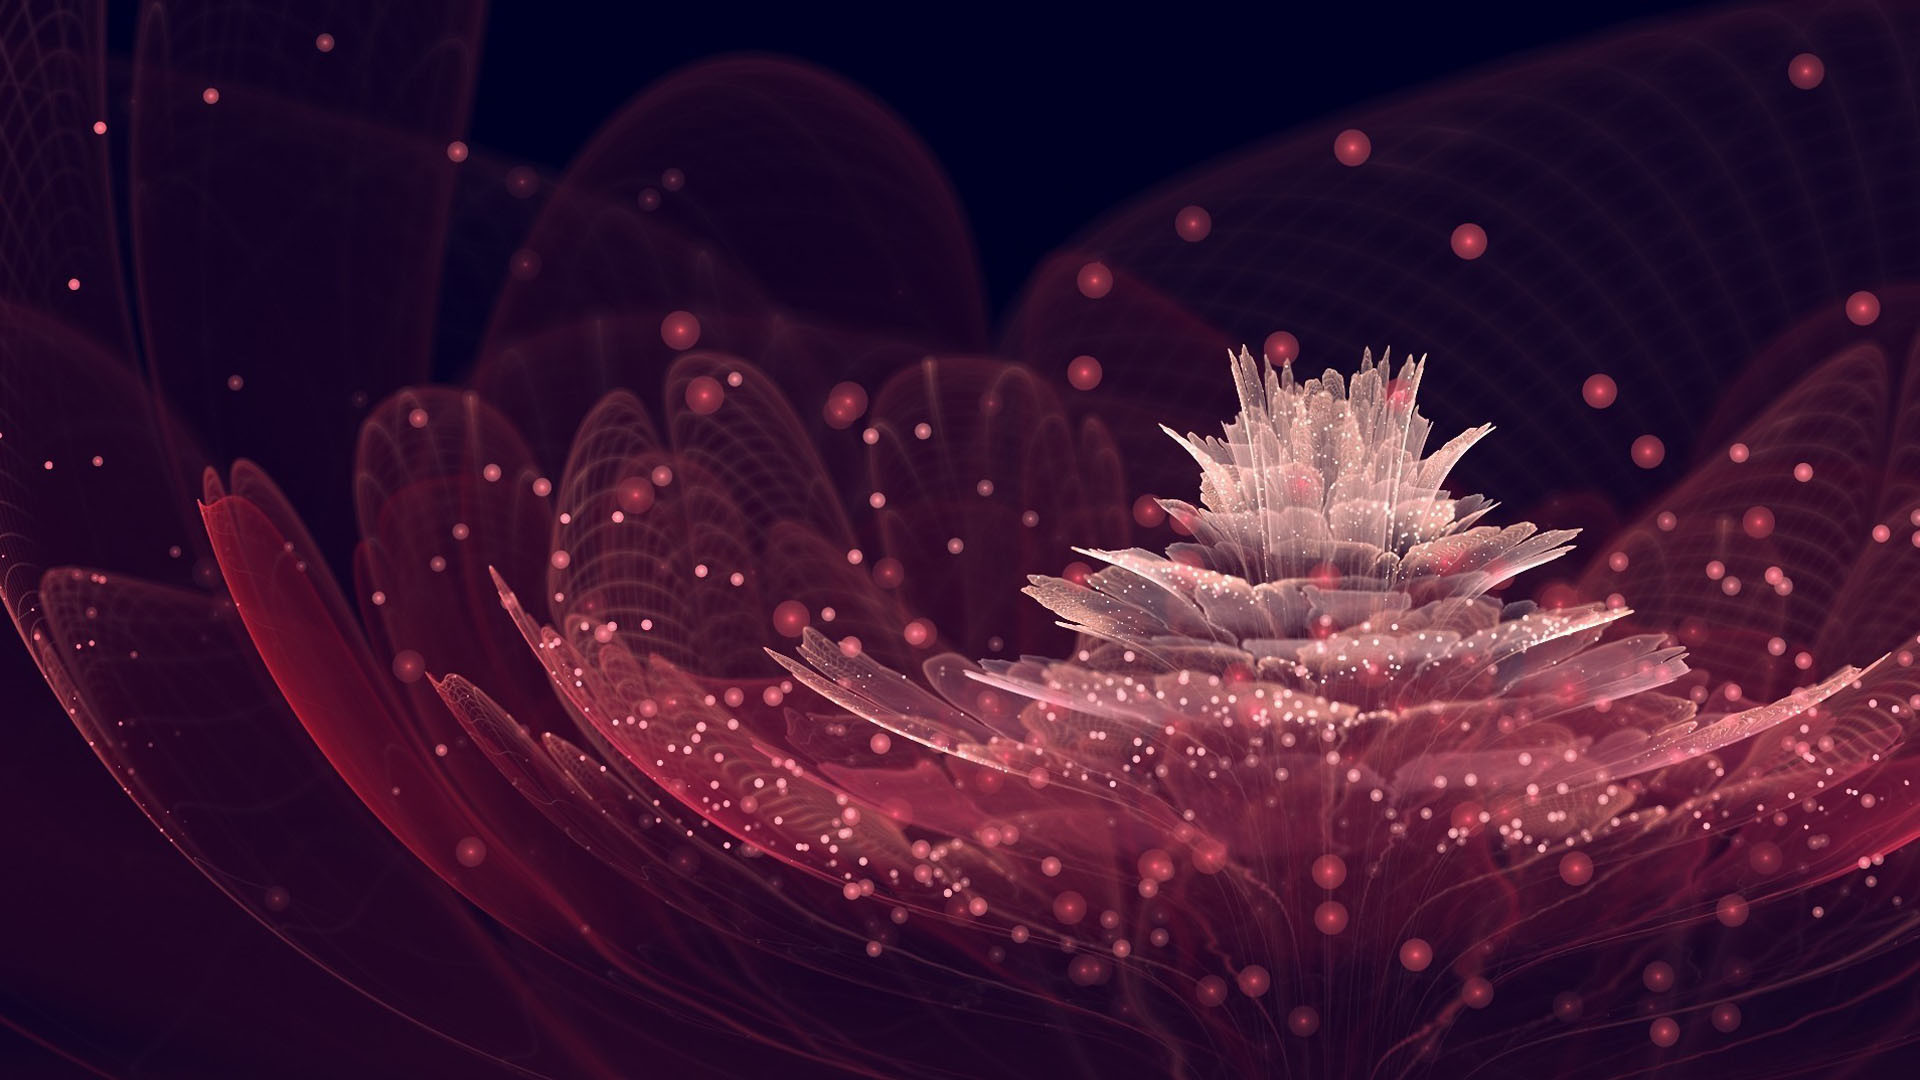 1920x1080 Nothing found for Flower Petals Neon Mesh Sparks Pink Black .